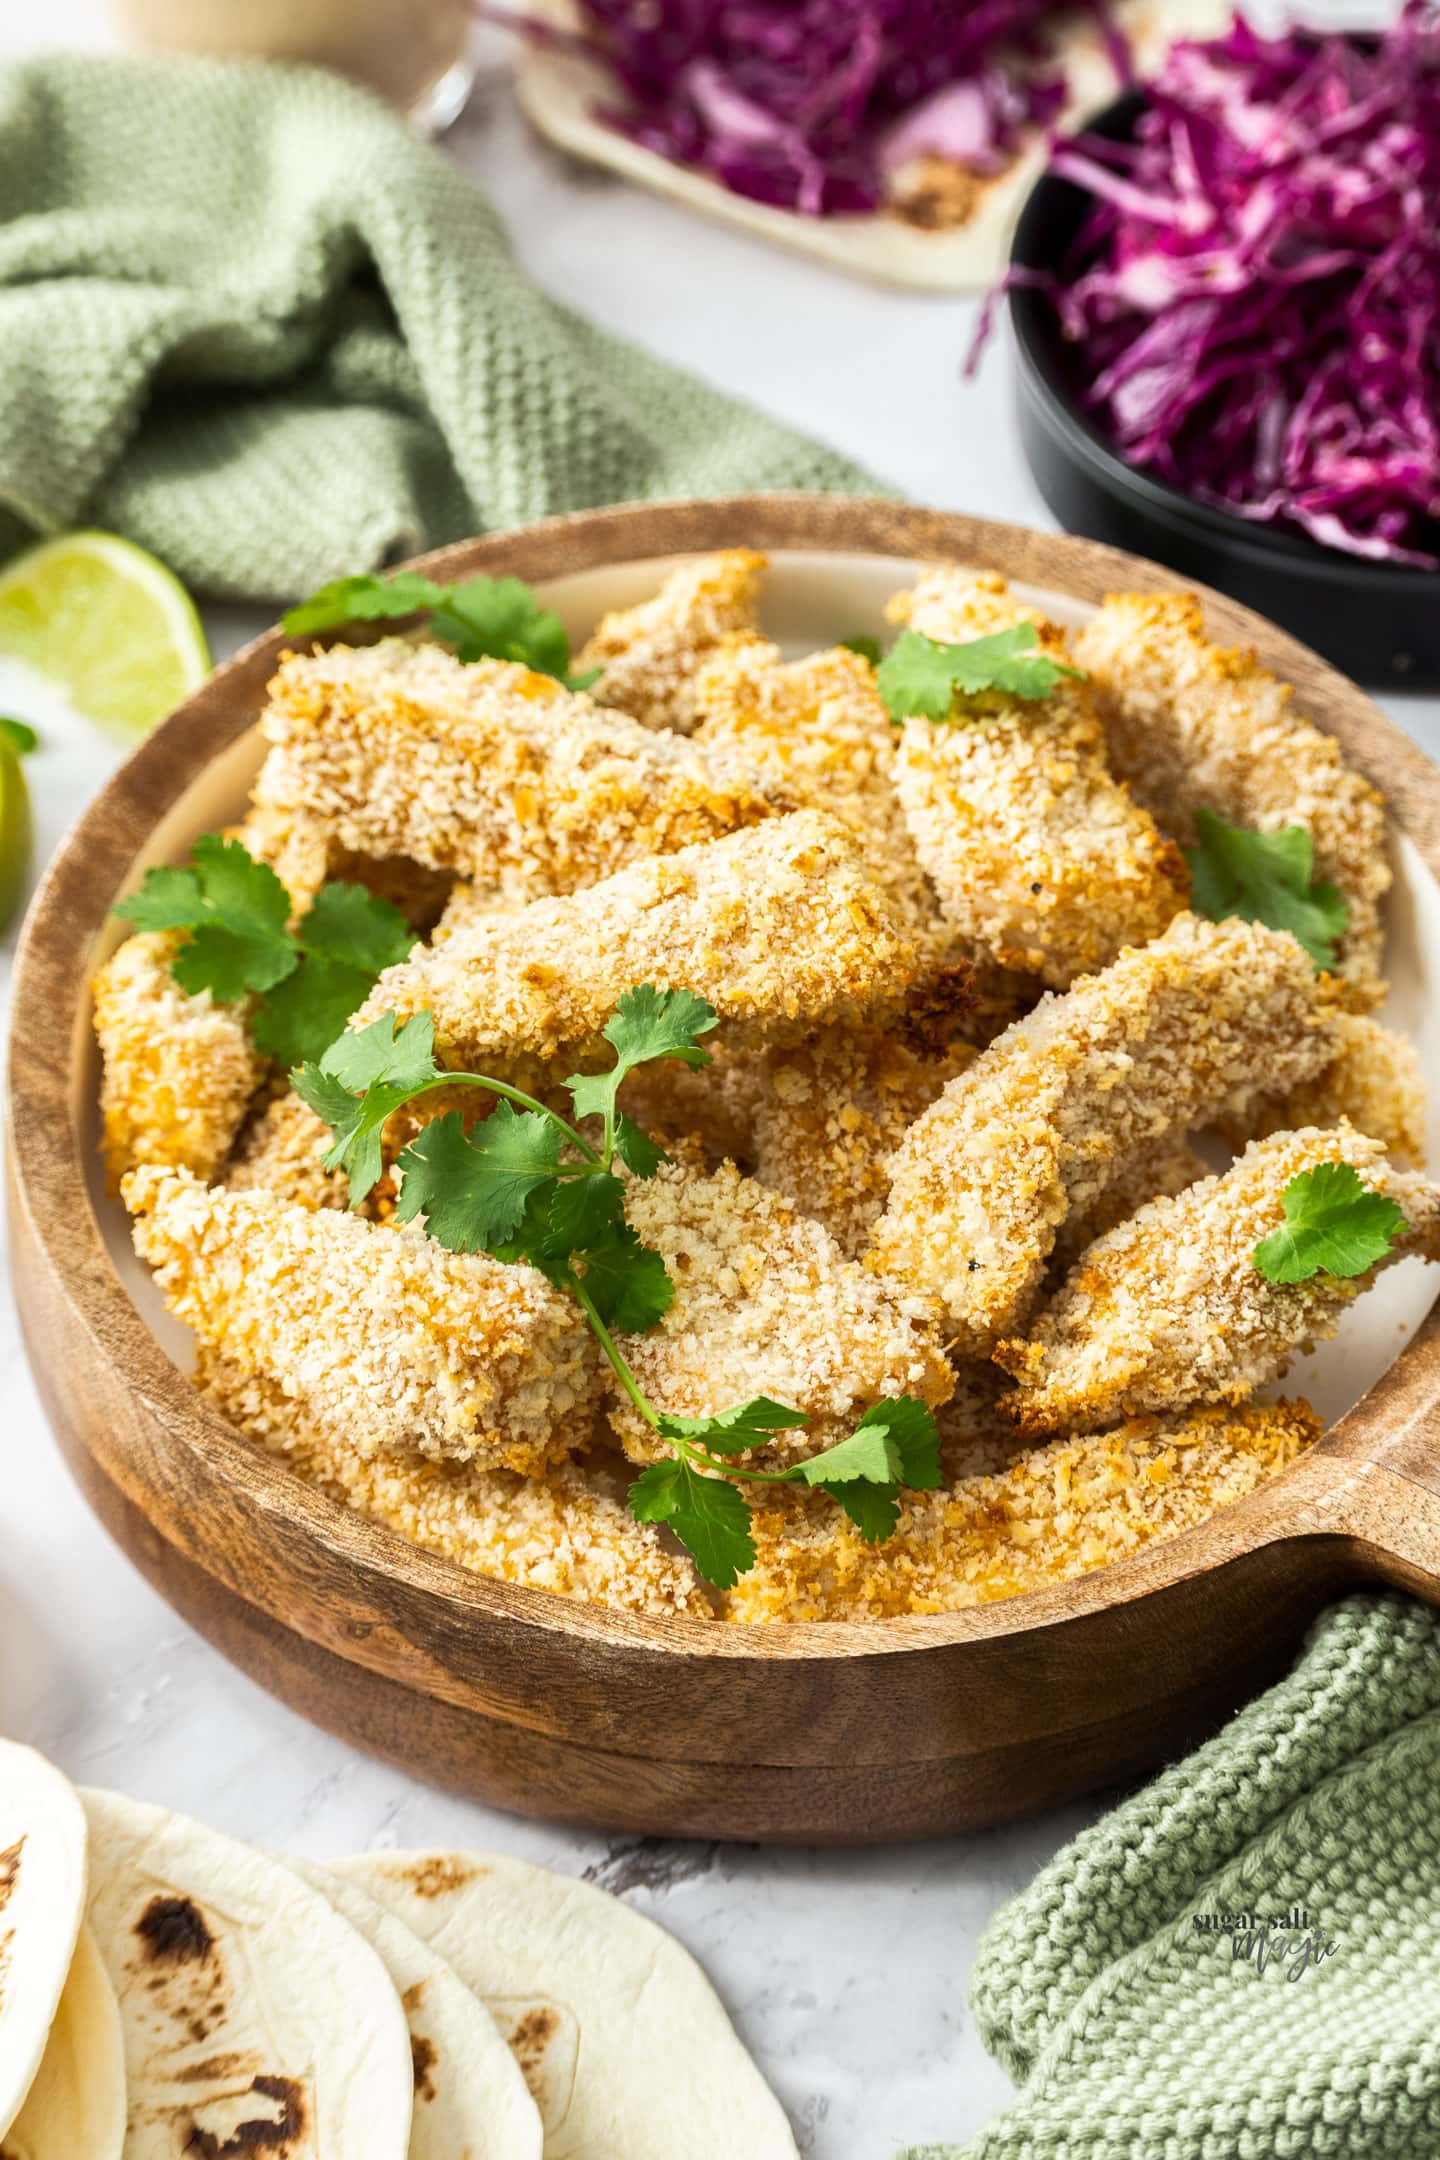 Pieces of baked crumbed fish in a wooden bowl.